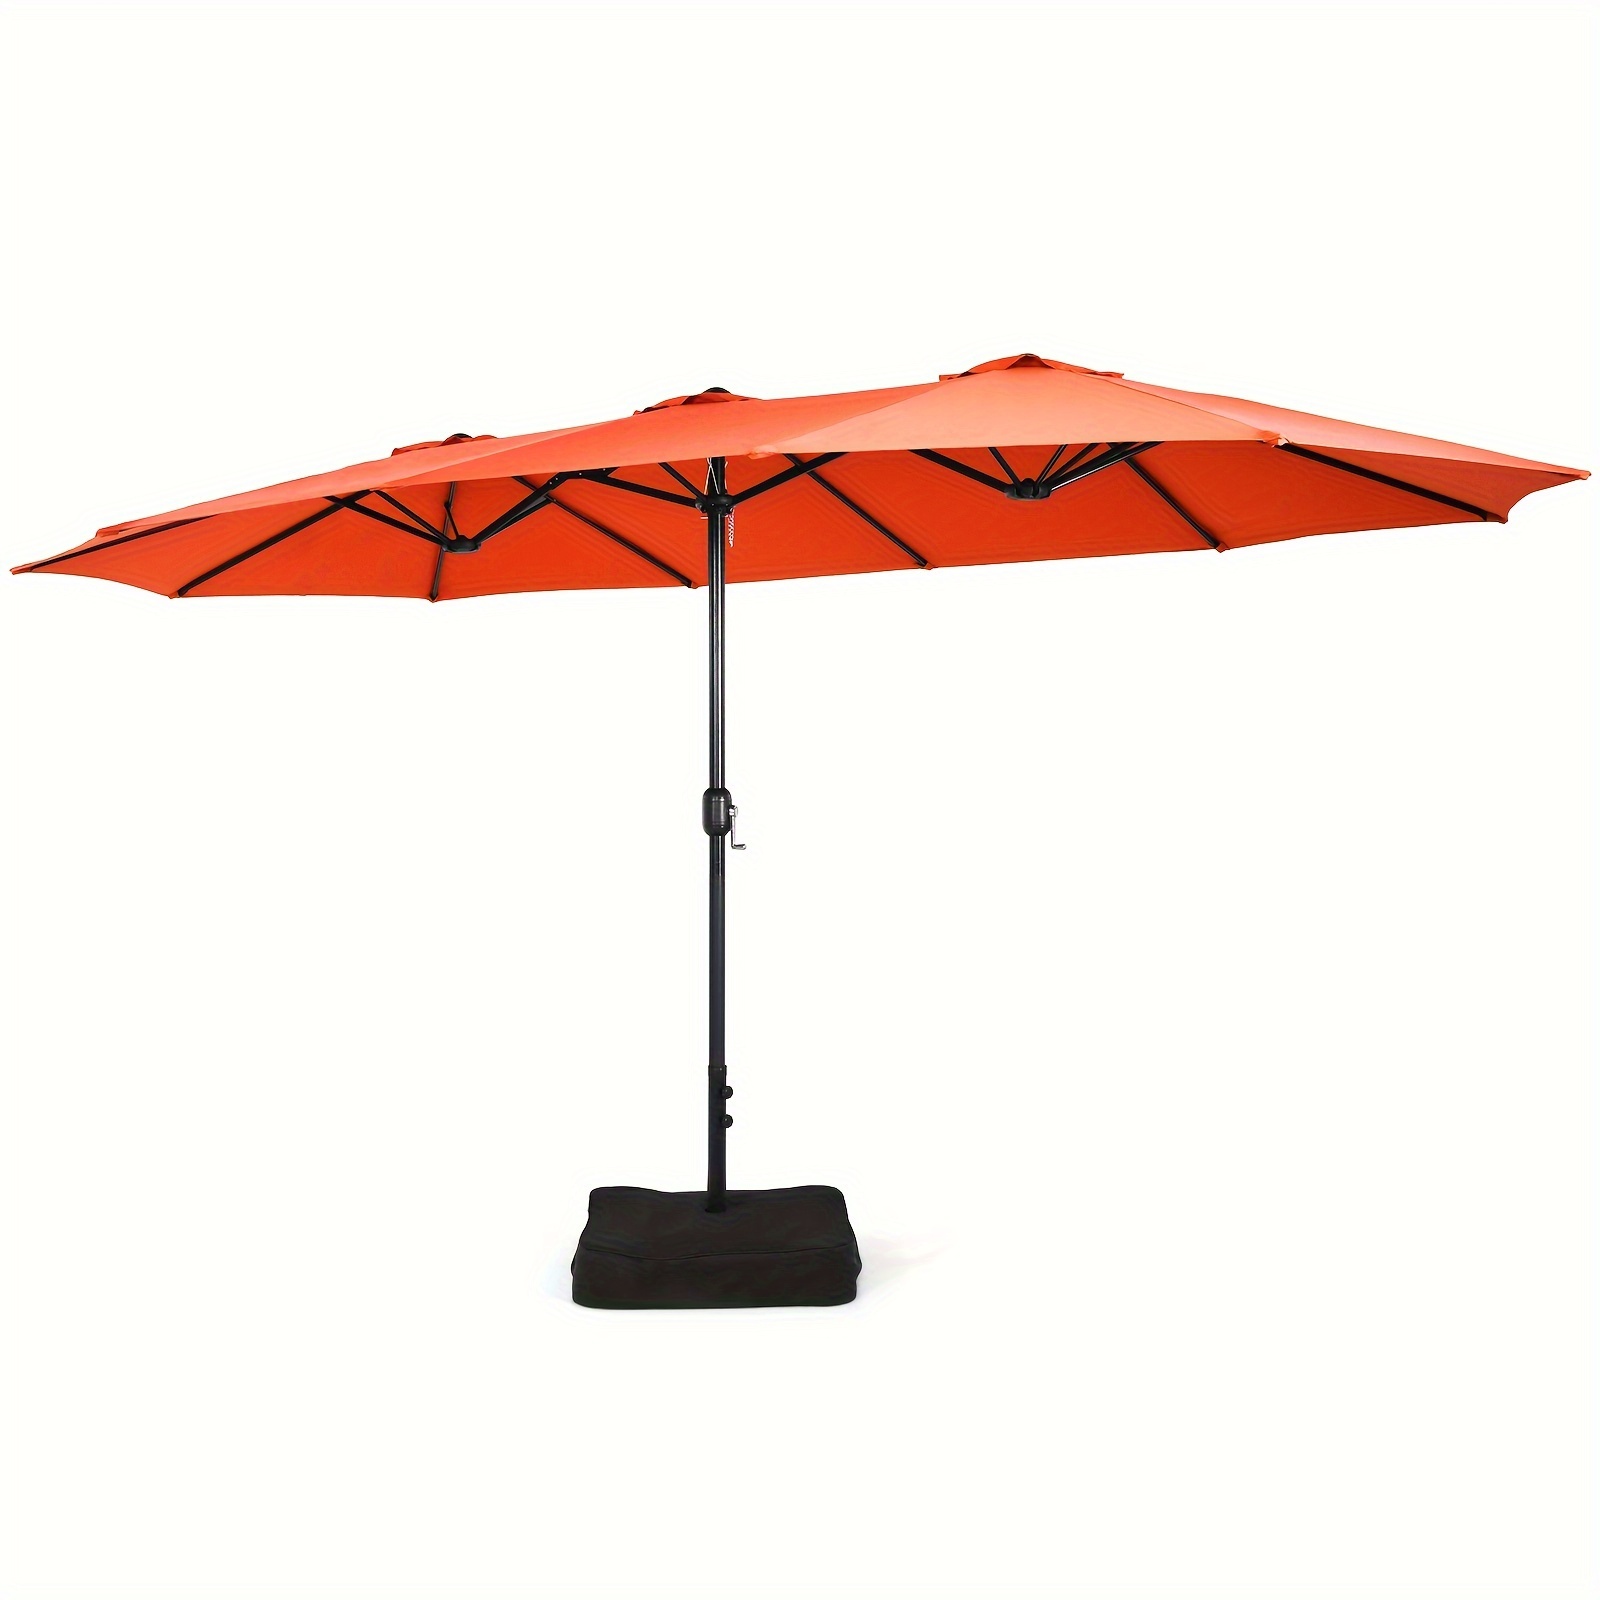 

15ft Double-sided Twin Patio Umbrella With Crank, Outdoor Market Base - Ideal For Garden & Deck Use